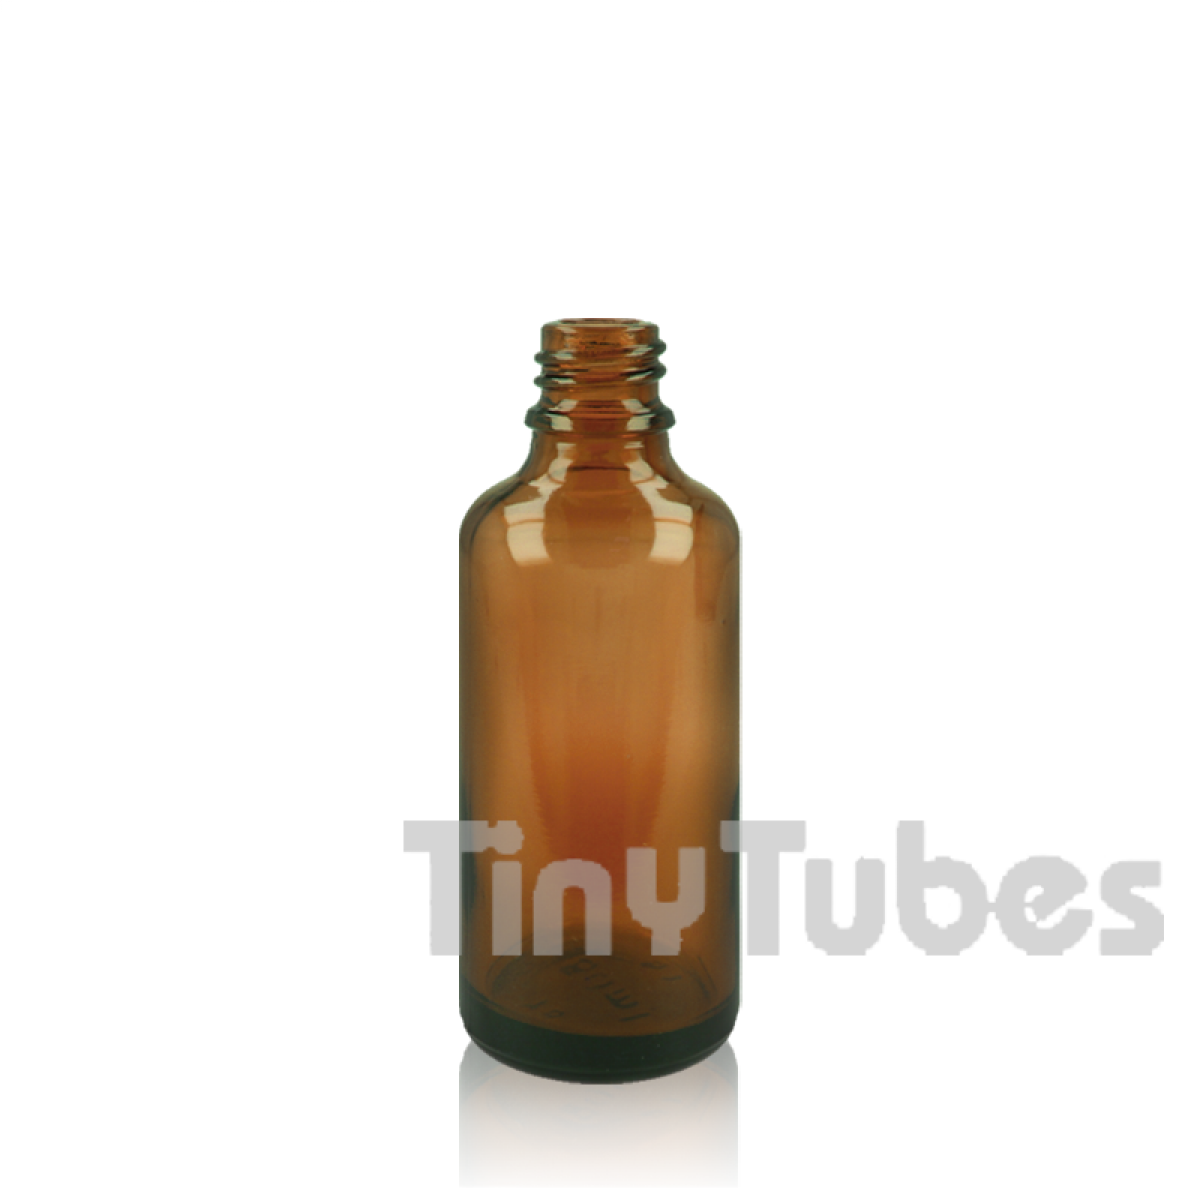 https://tiny-tubes.com/image/cache/catalog/products/DROPPER60A_1-1200x1200.png